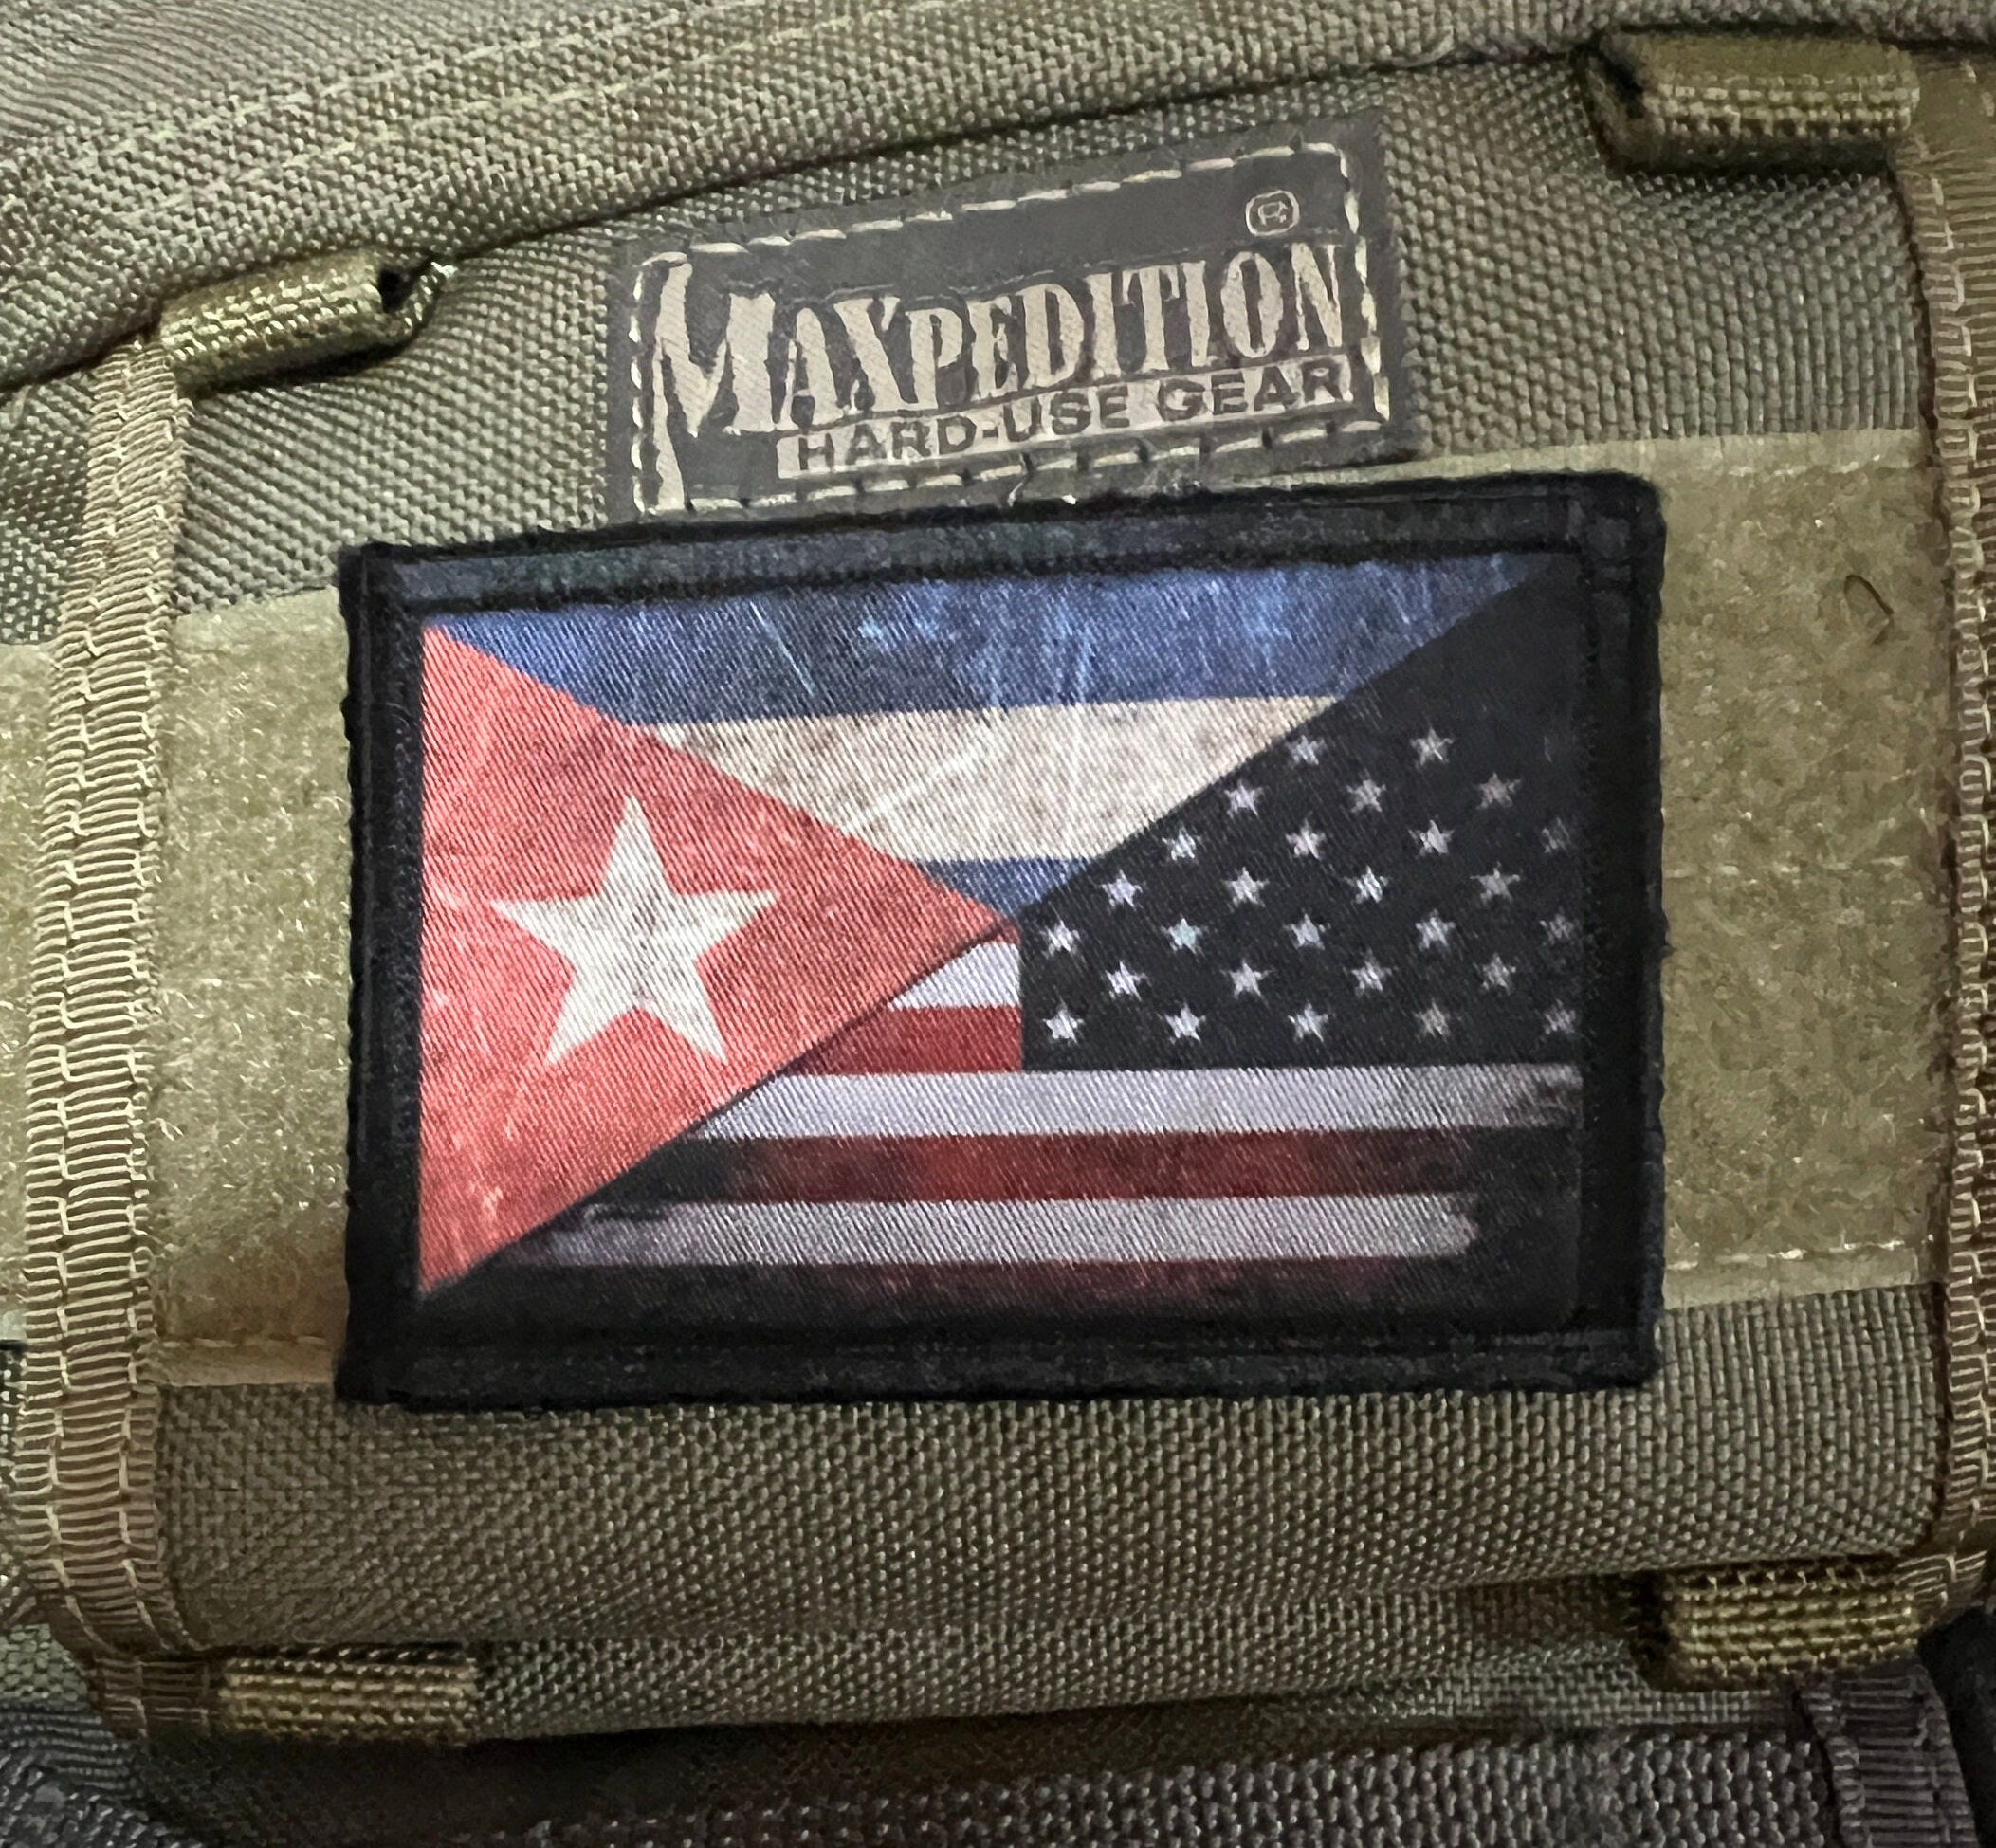 France Flag Patch  Maxpedition – MAXPEDITION